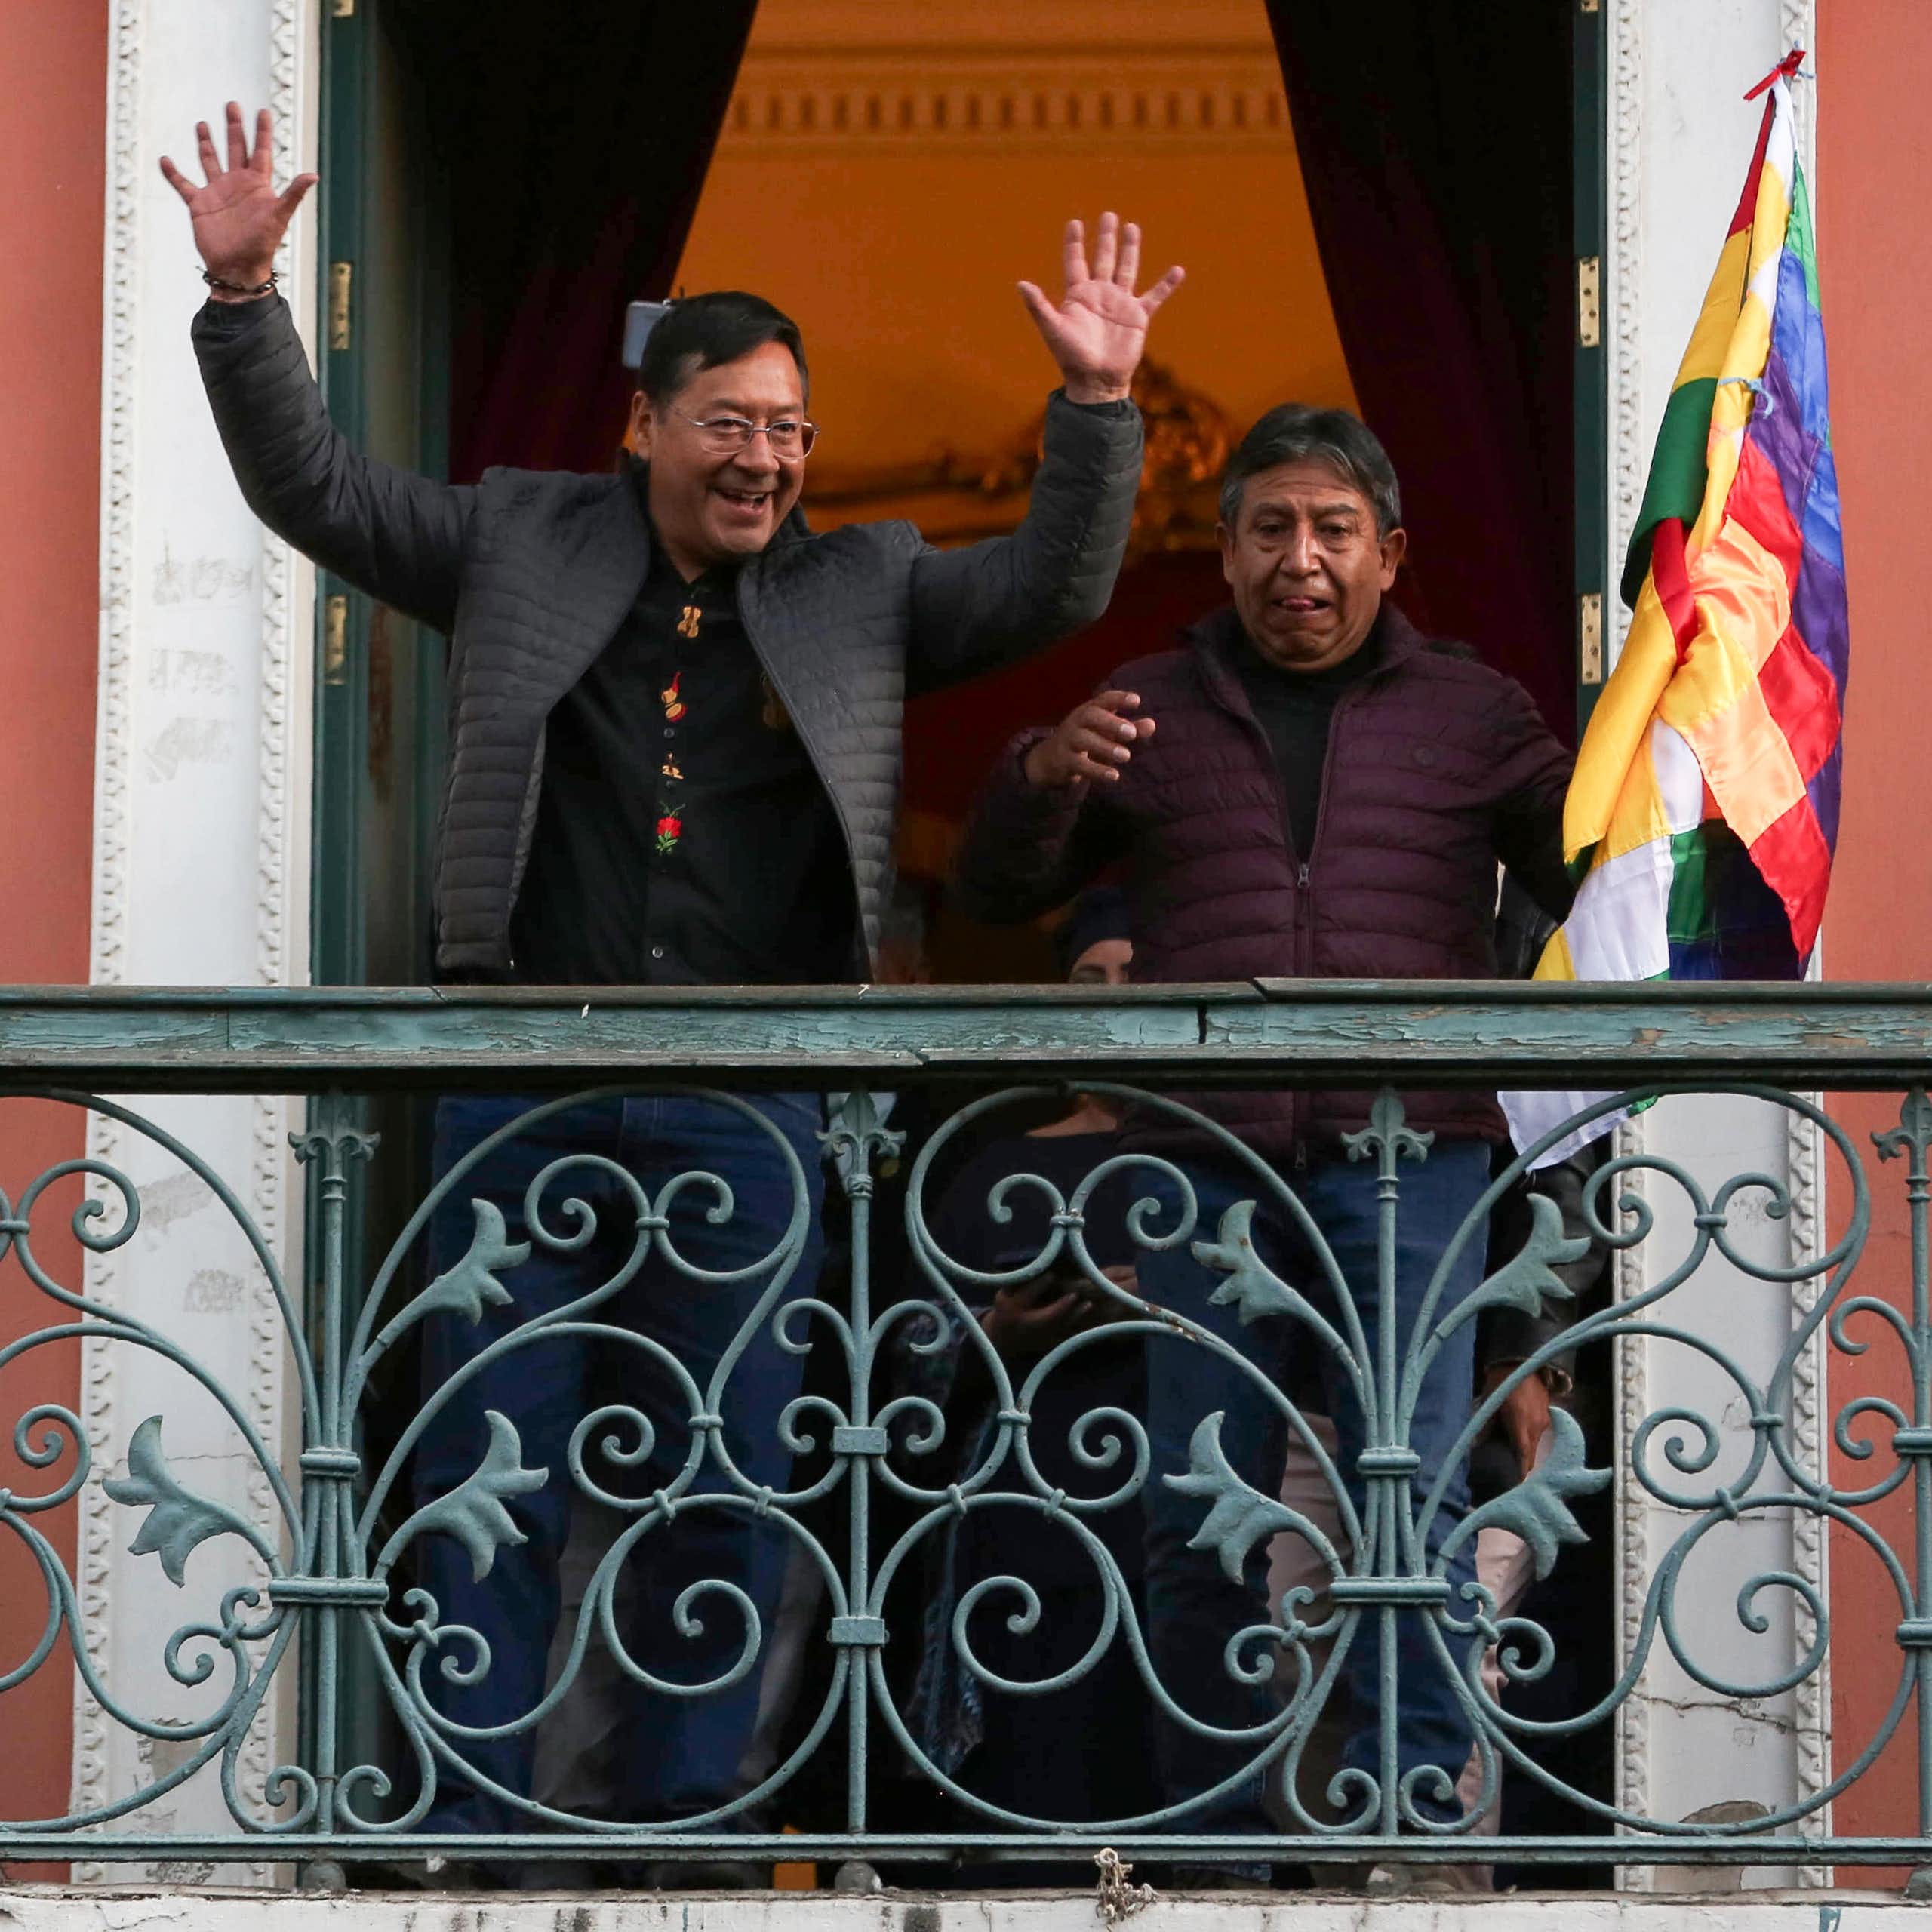 Luis Arce and his vice president standing on a balcony greeting supporters.